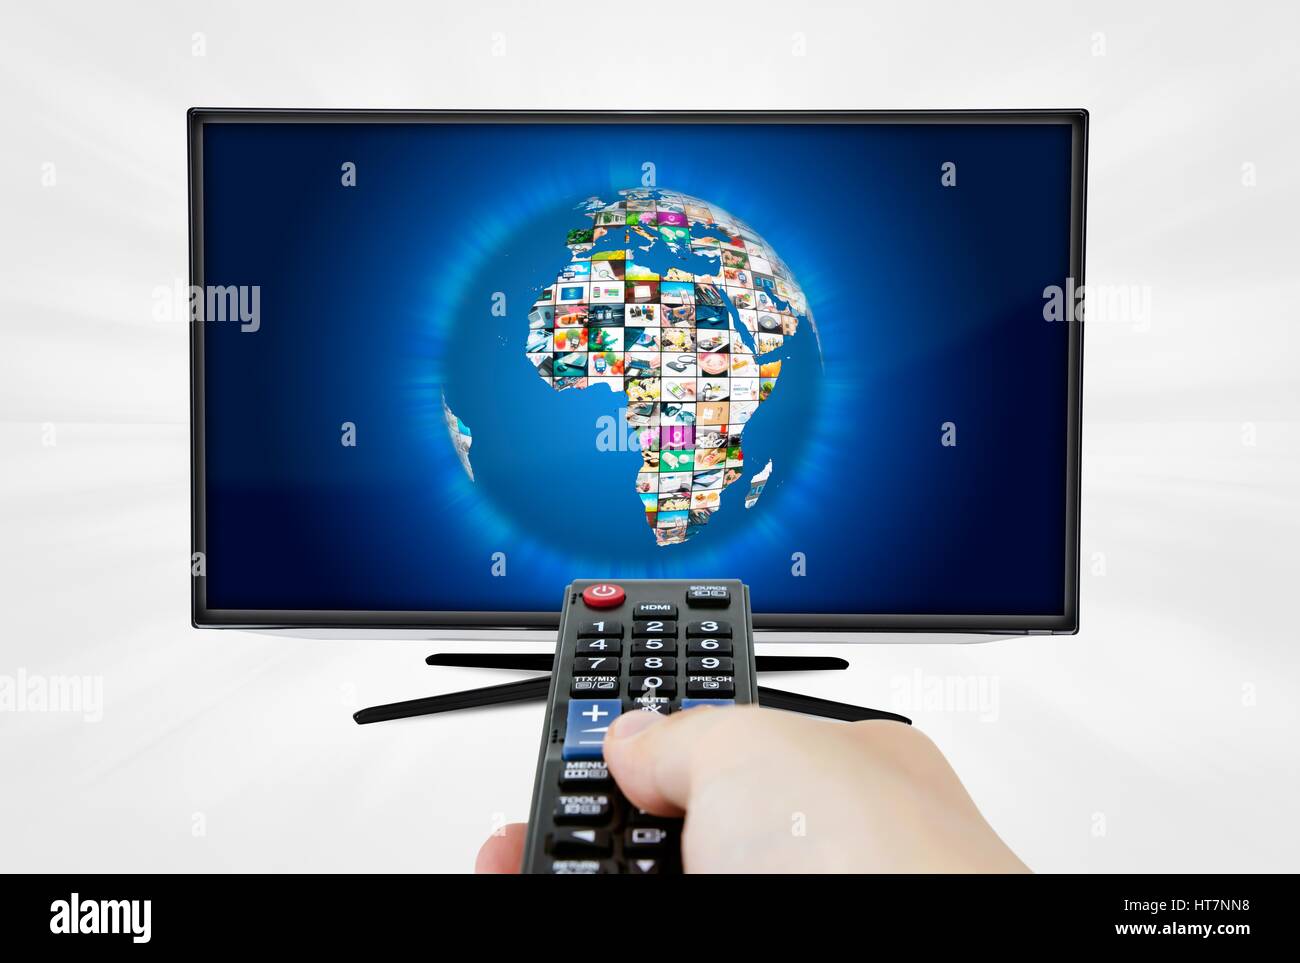 Widescreen high definition TV screen with sphere video gallery. Remote control in hand Stock Photo